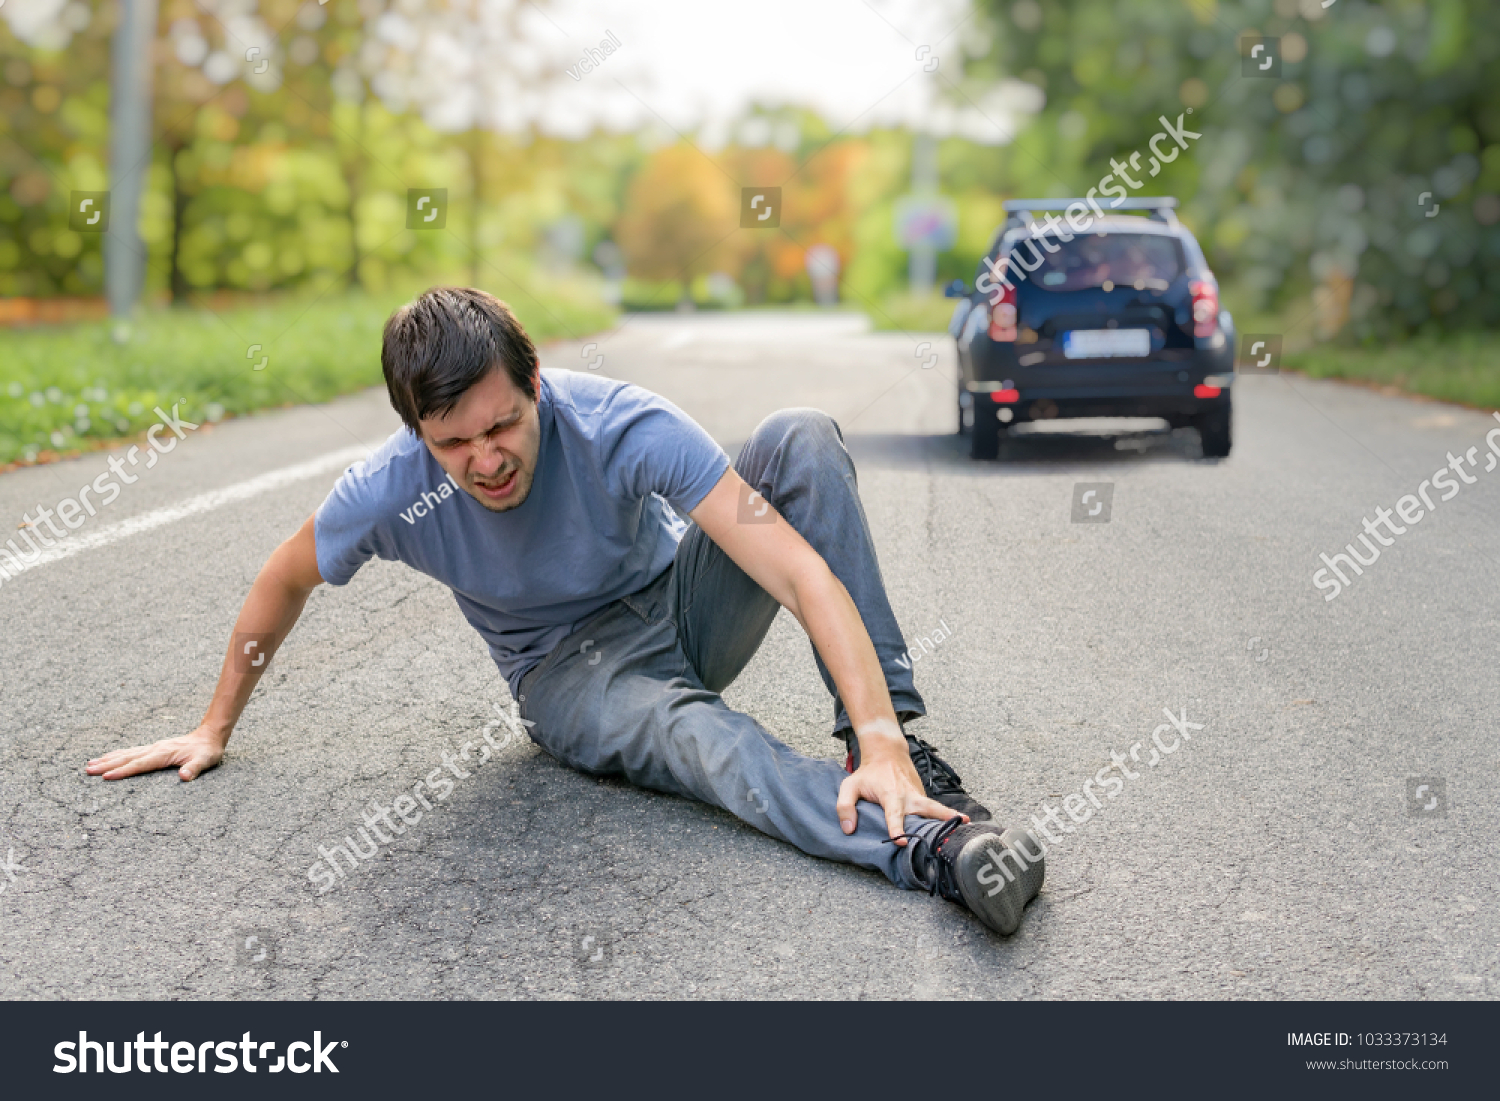 Hit and run concept. Injured man on road in front of a car. #1033373134